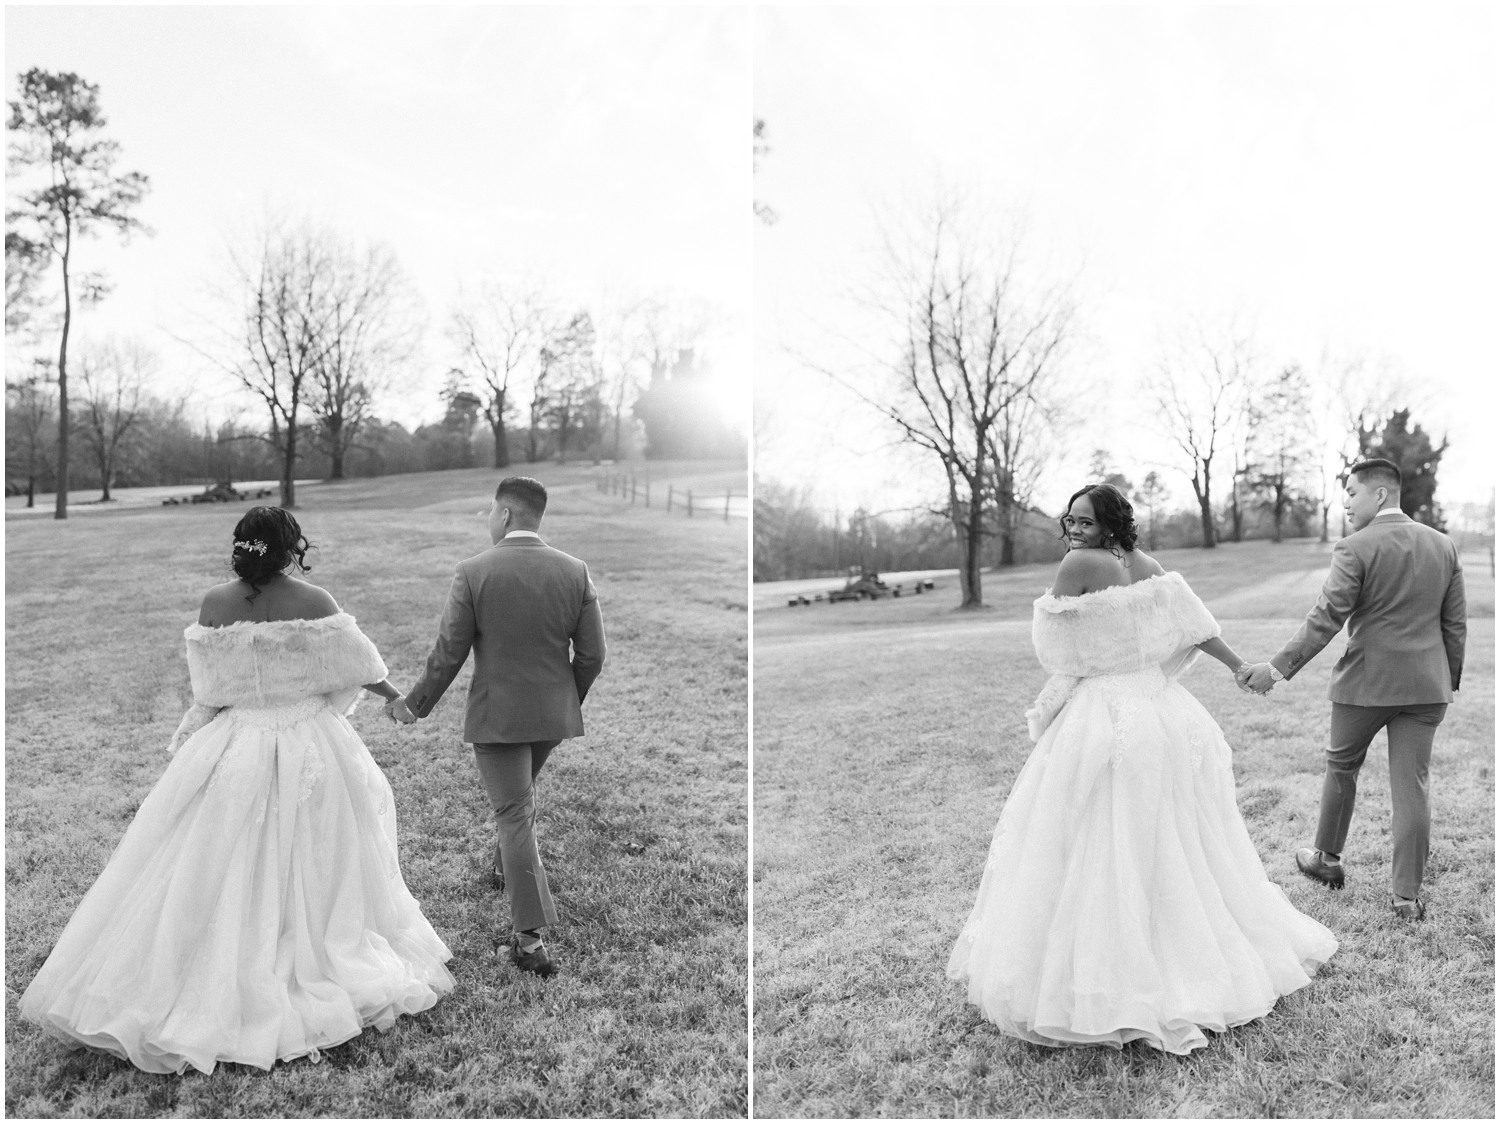 Couple walks away into the sunset on their wedding day photographed by Winston Salem Wedding Photographer Chelsea Renay.